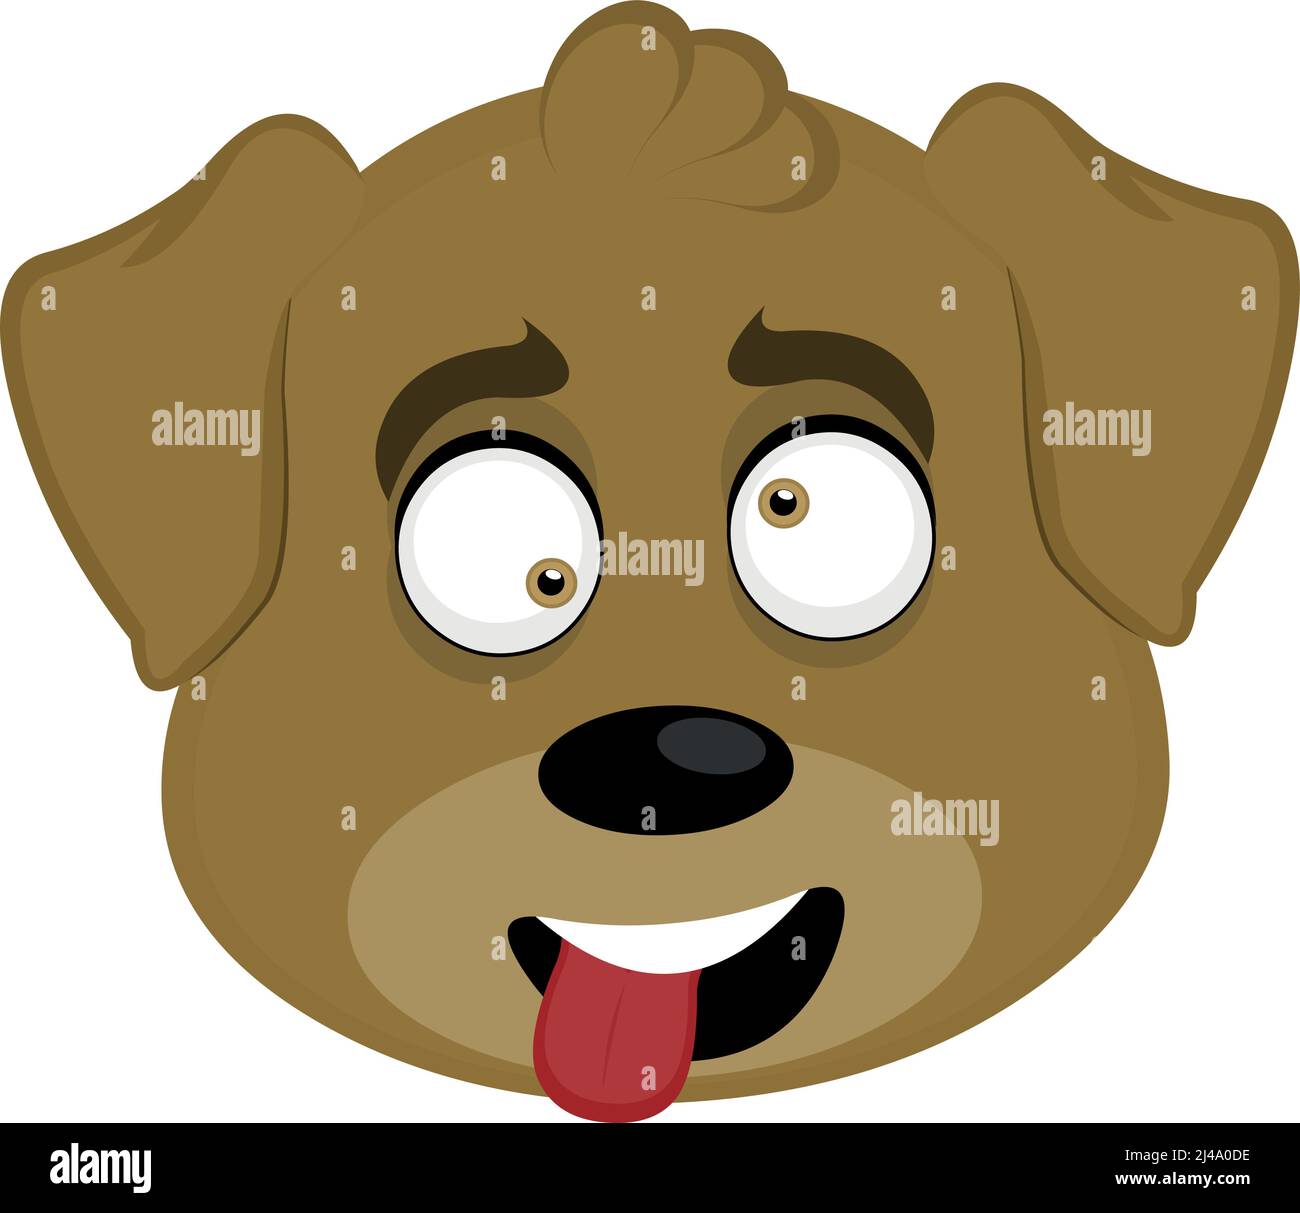 Vector emoticon illustration cartoon of a dog's head with a mocking expression with wild eyes and sticking out his tongue with an open mouth Stock Vector